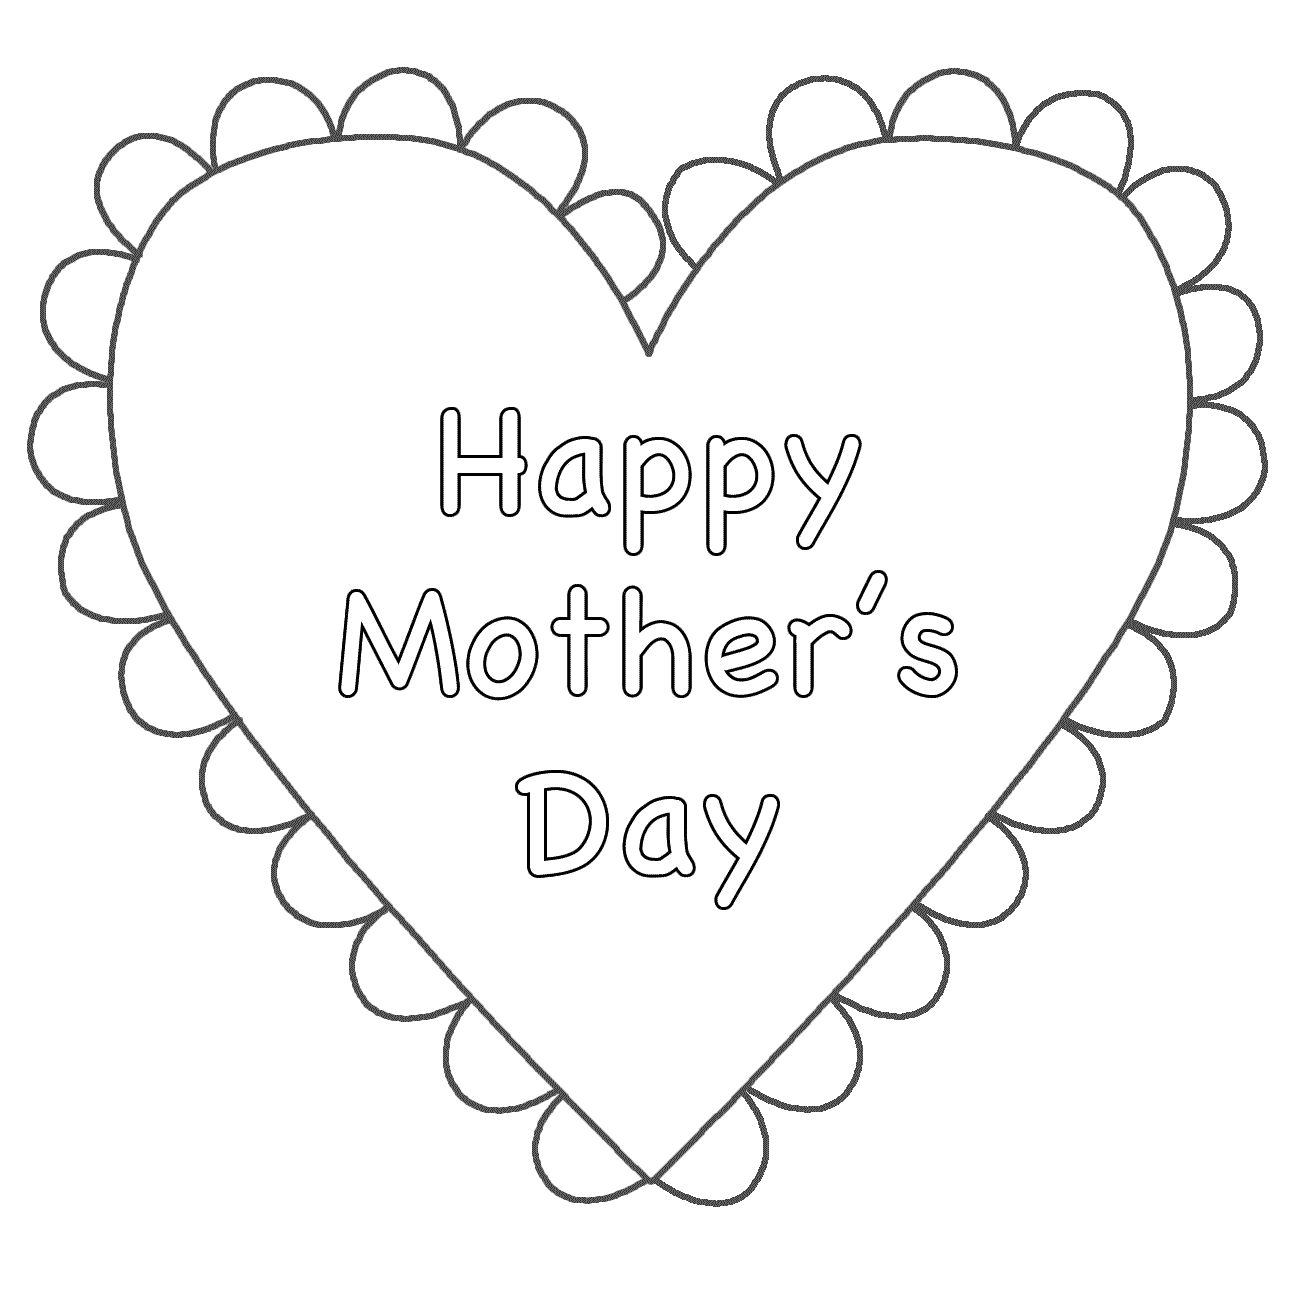 the-free-printable-mother-s-day-coloring-page-is-on-top-of-colored-pencils